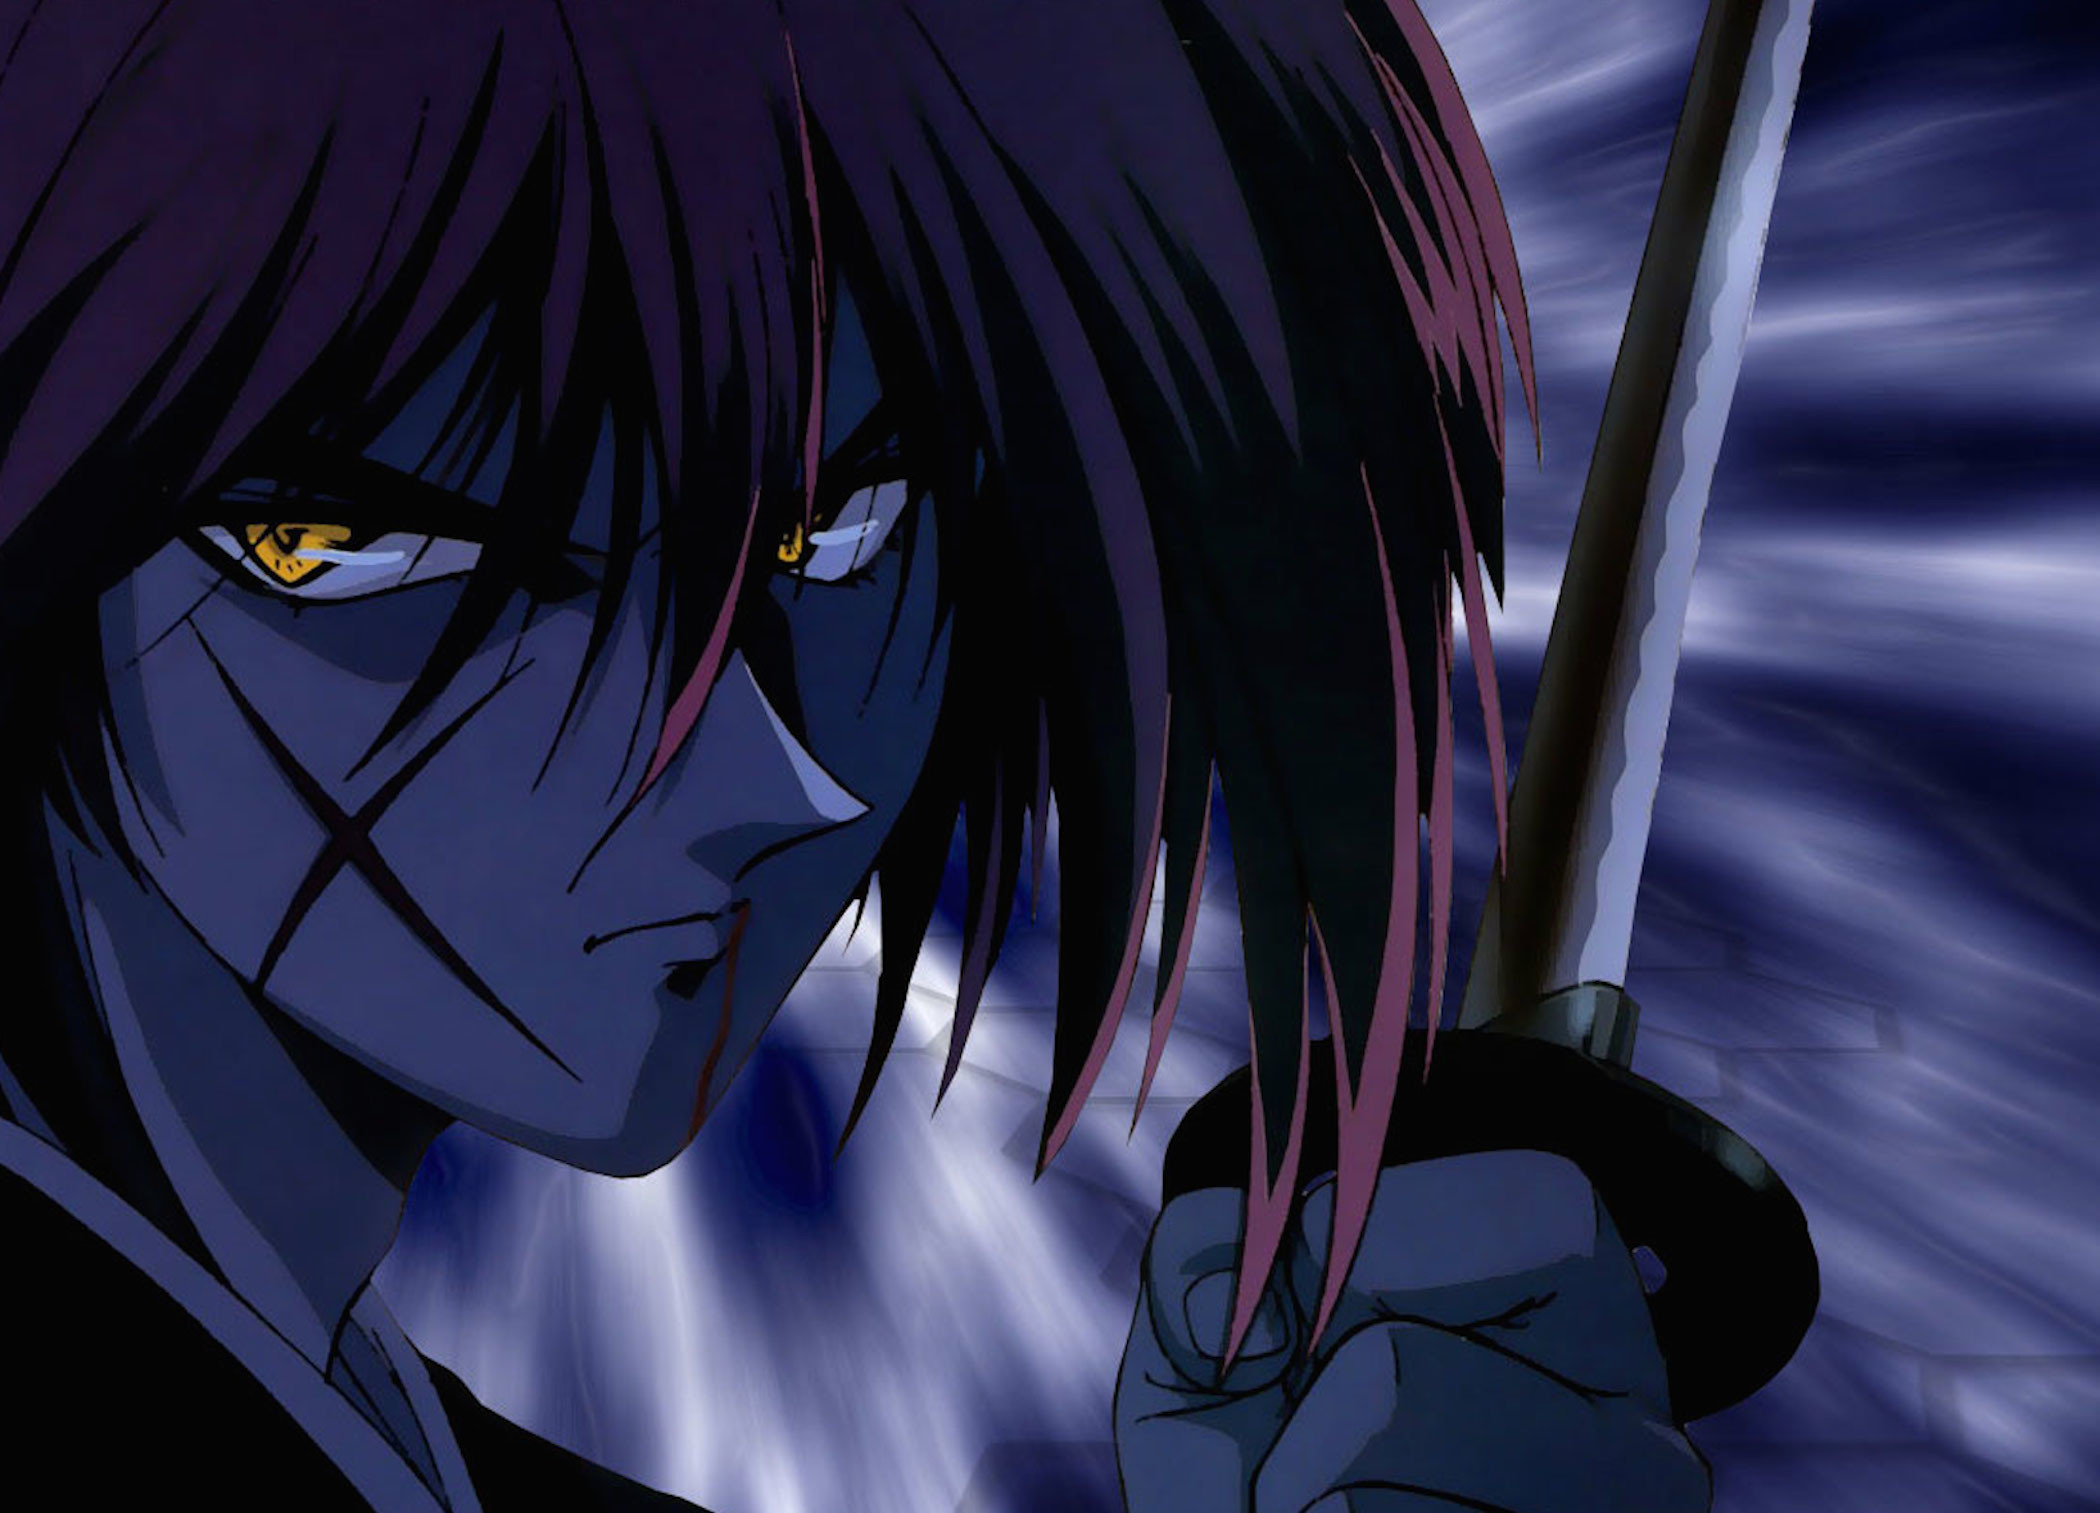  Kenshin  Wallpapers 59 pictures  